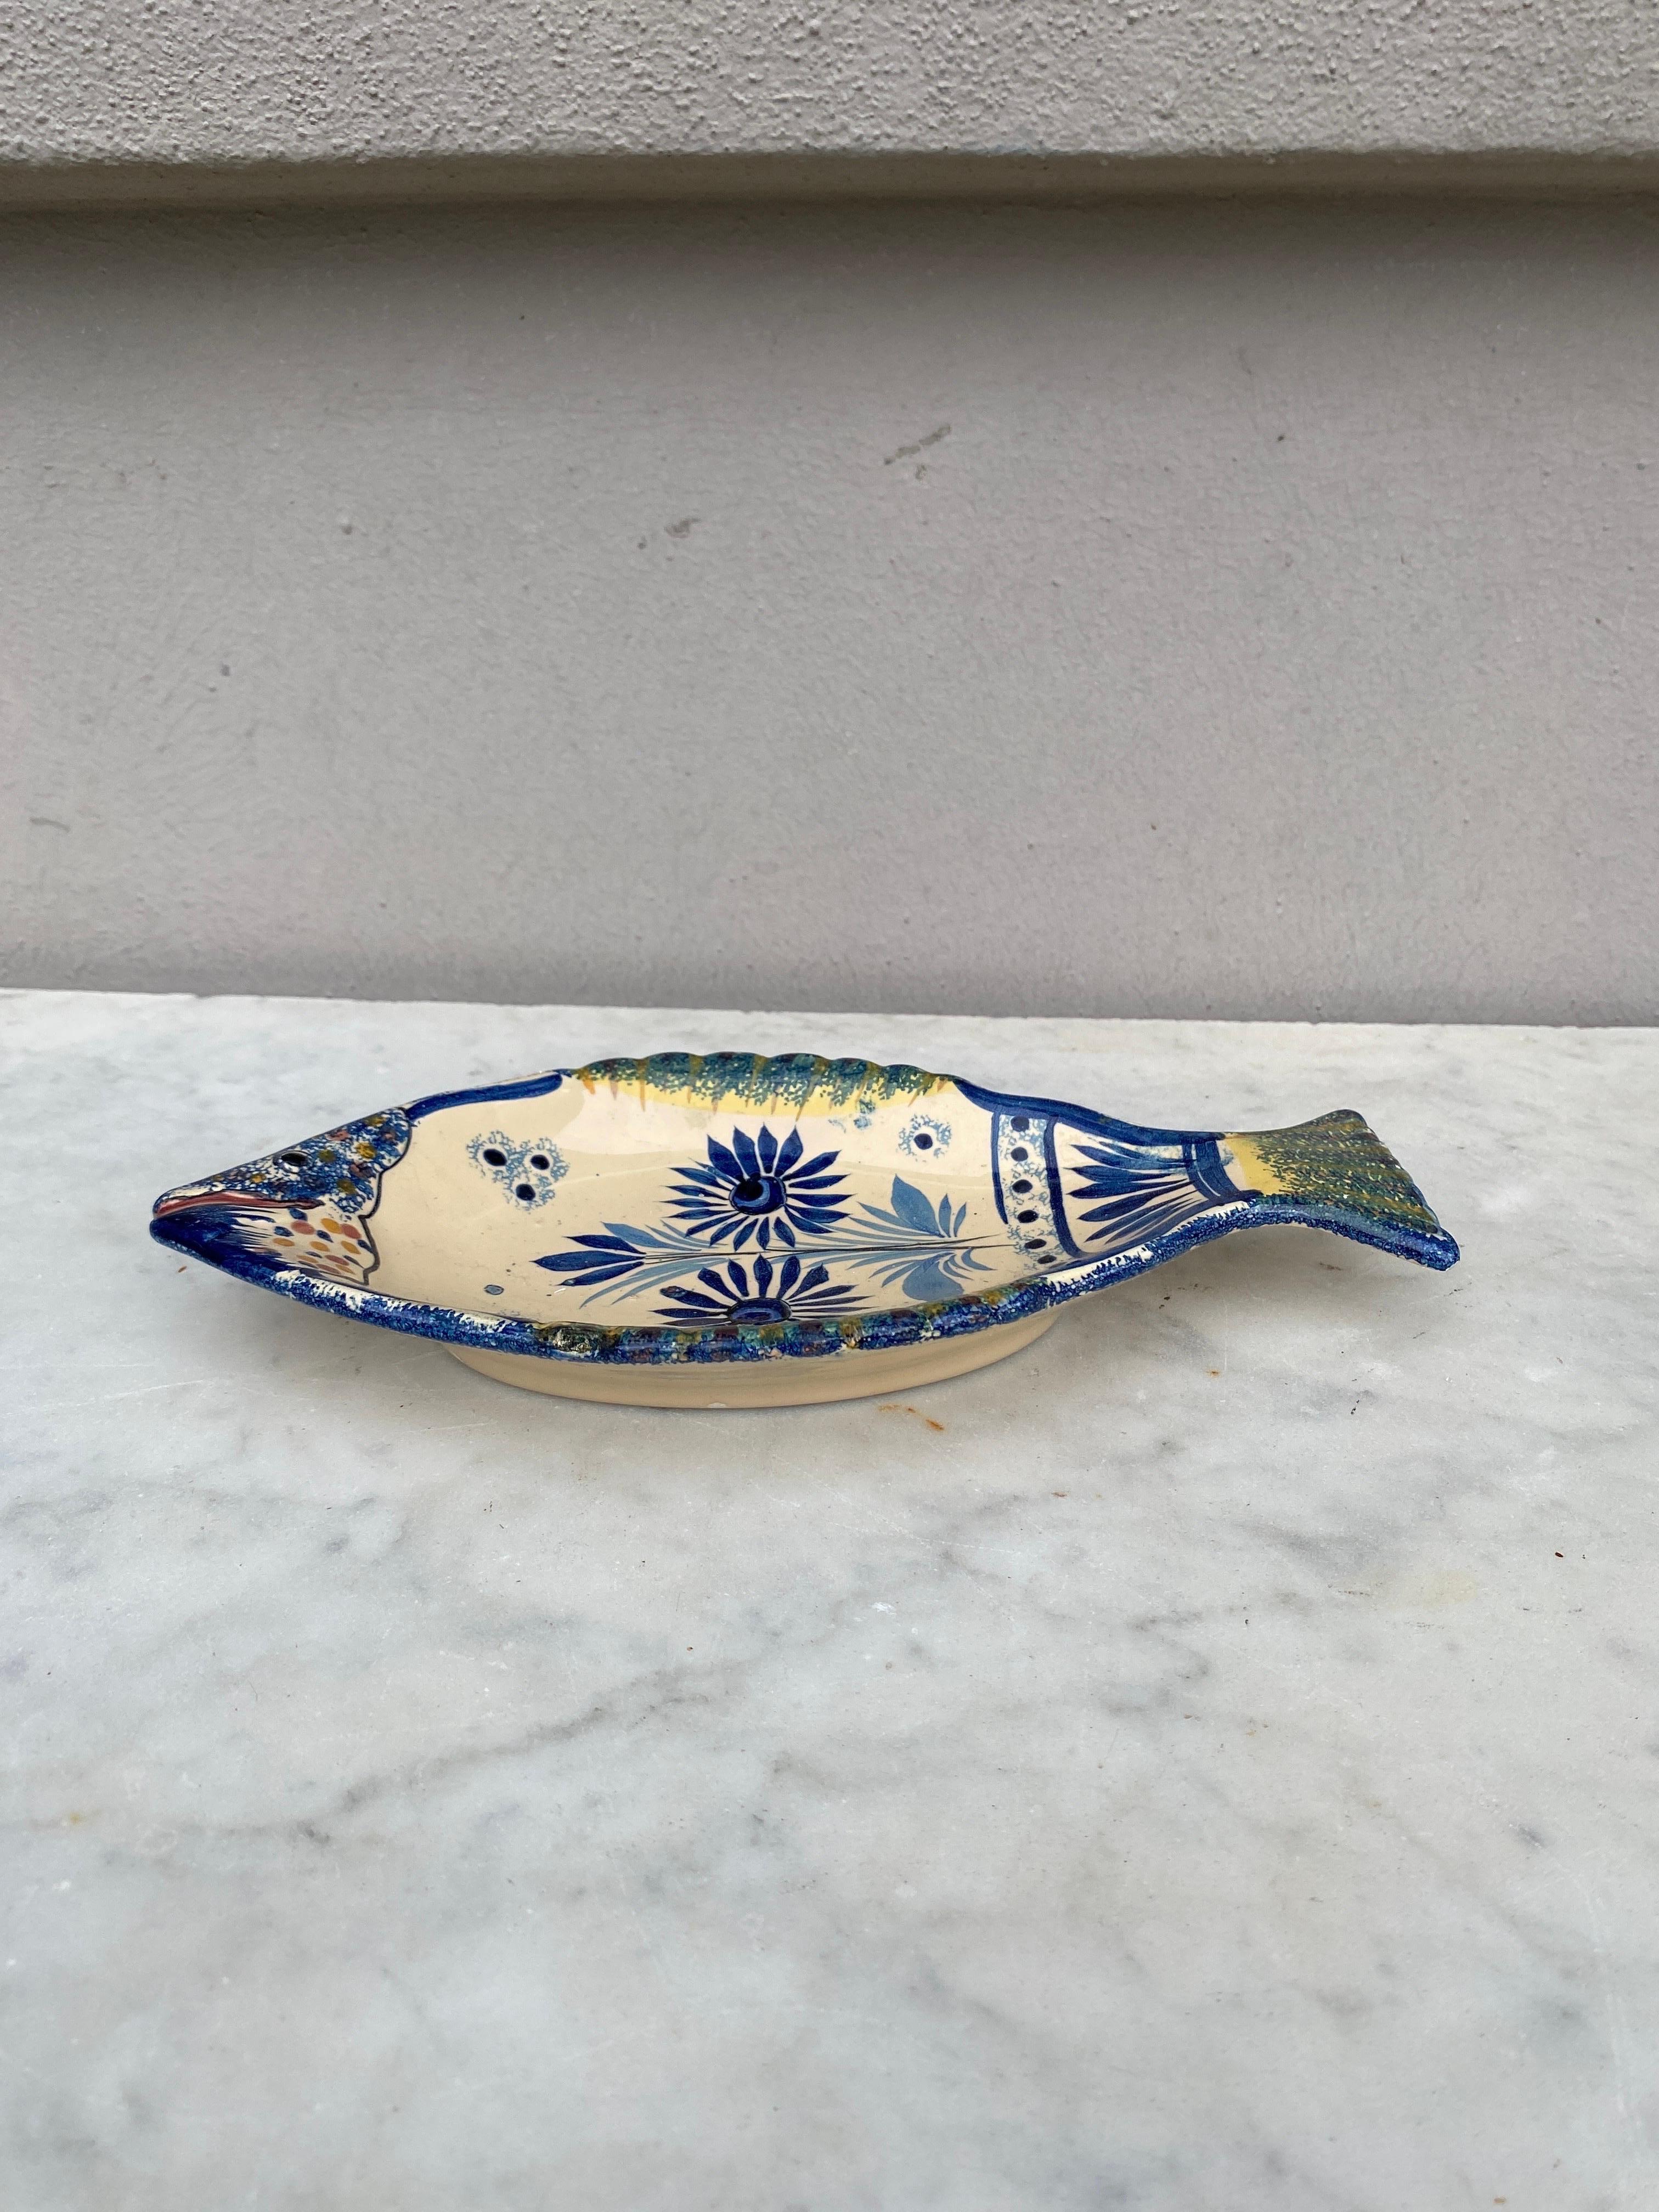 Rustic French Faience Blue & White Fish Platter Henriot Quimper, Circa 1930 For Sale